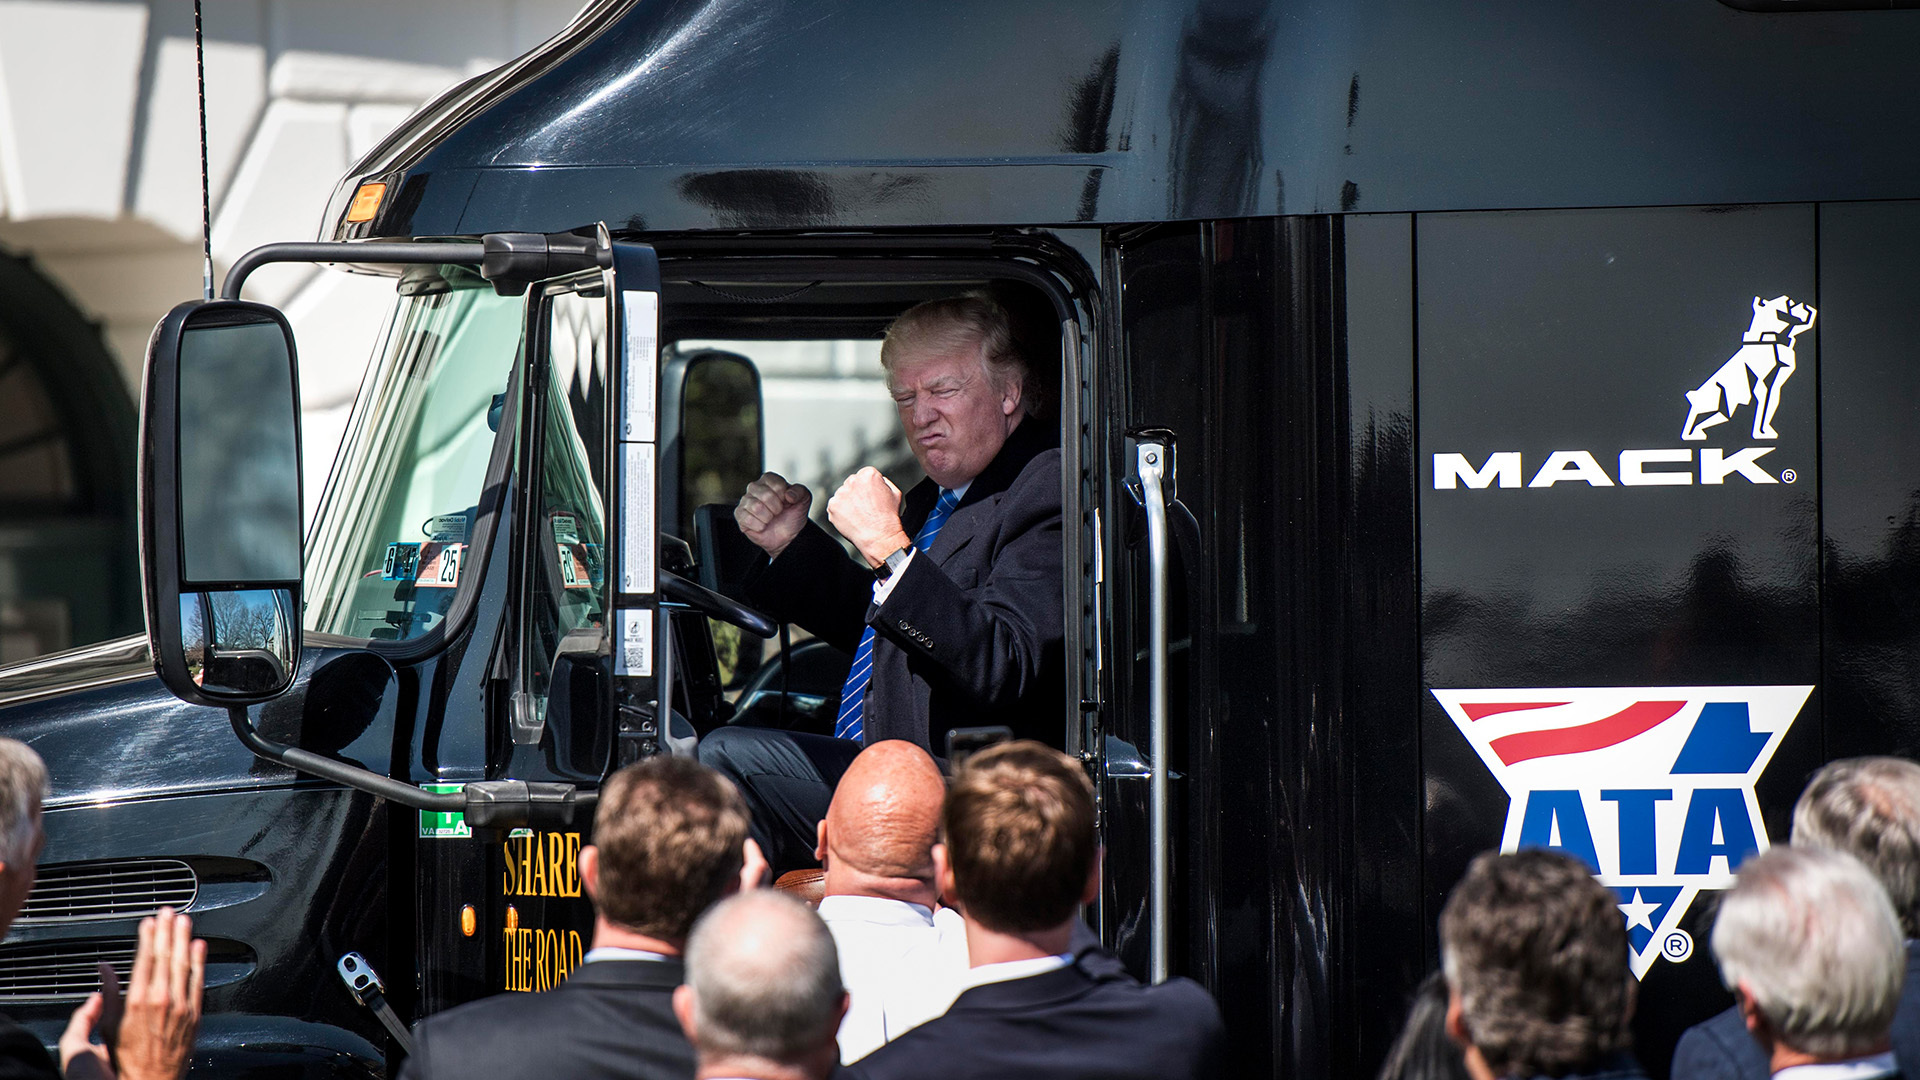 A group of pro-Trump truckers said they are boycotting New York City after a fraud ruling against the former president.